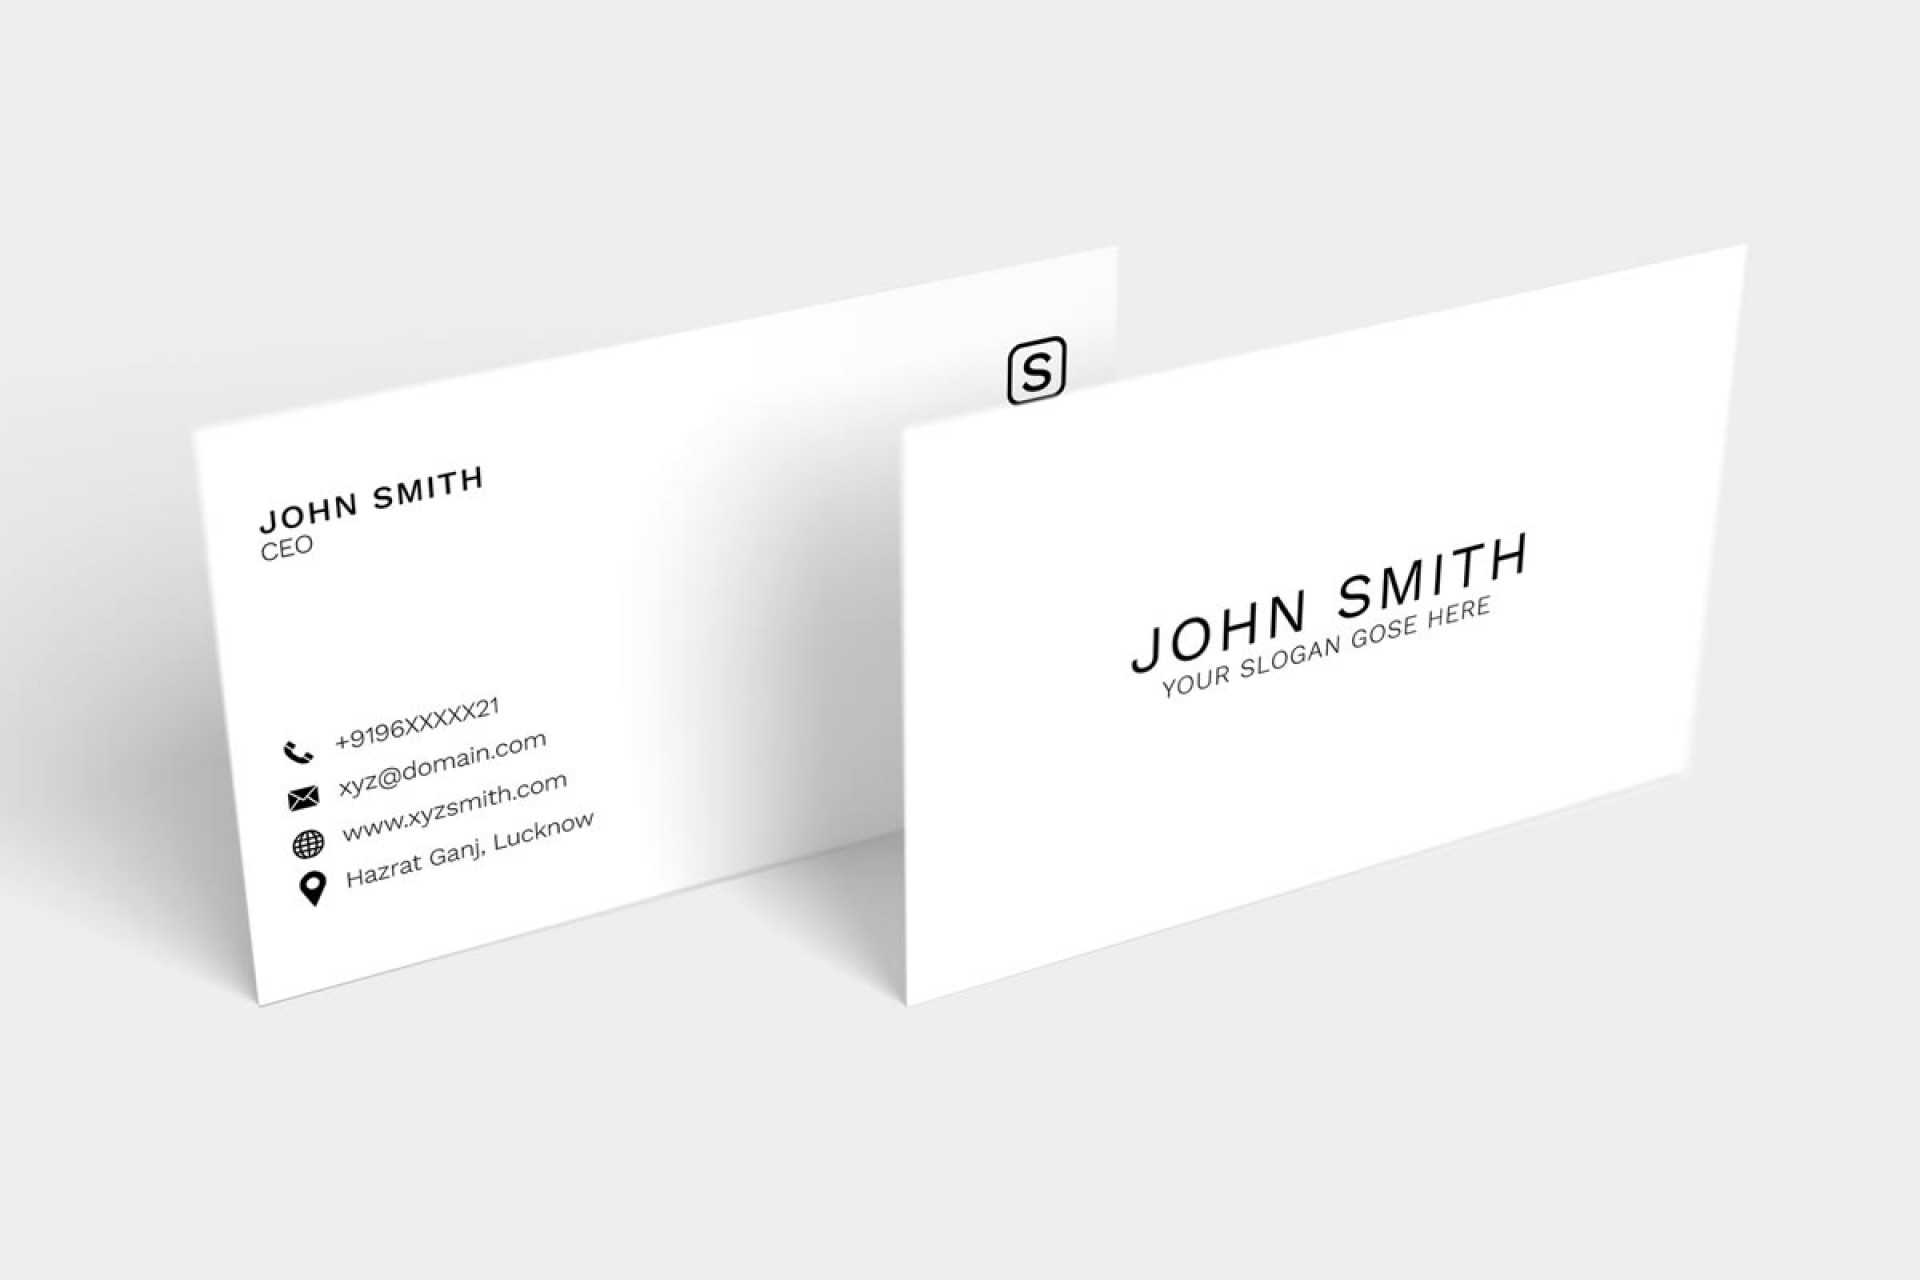 017 75Da9297Edcb7B238D53F00D6A511669 Resize Template Ideas Intended For Business Card Template Size Photoshop